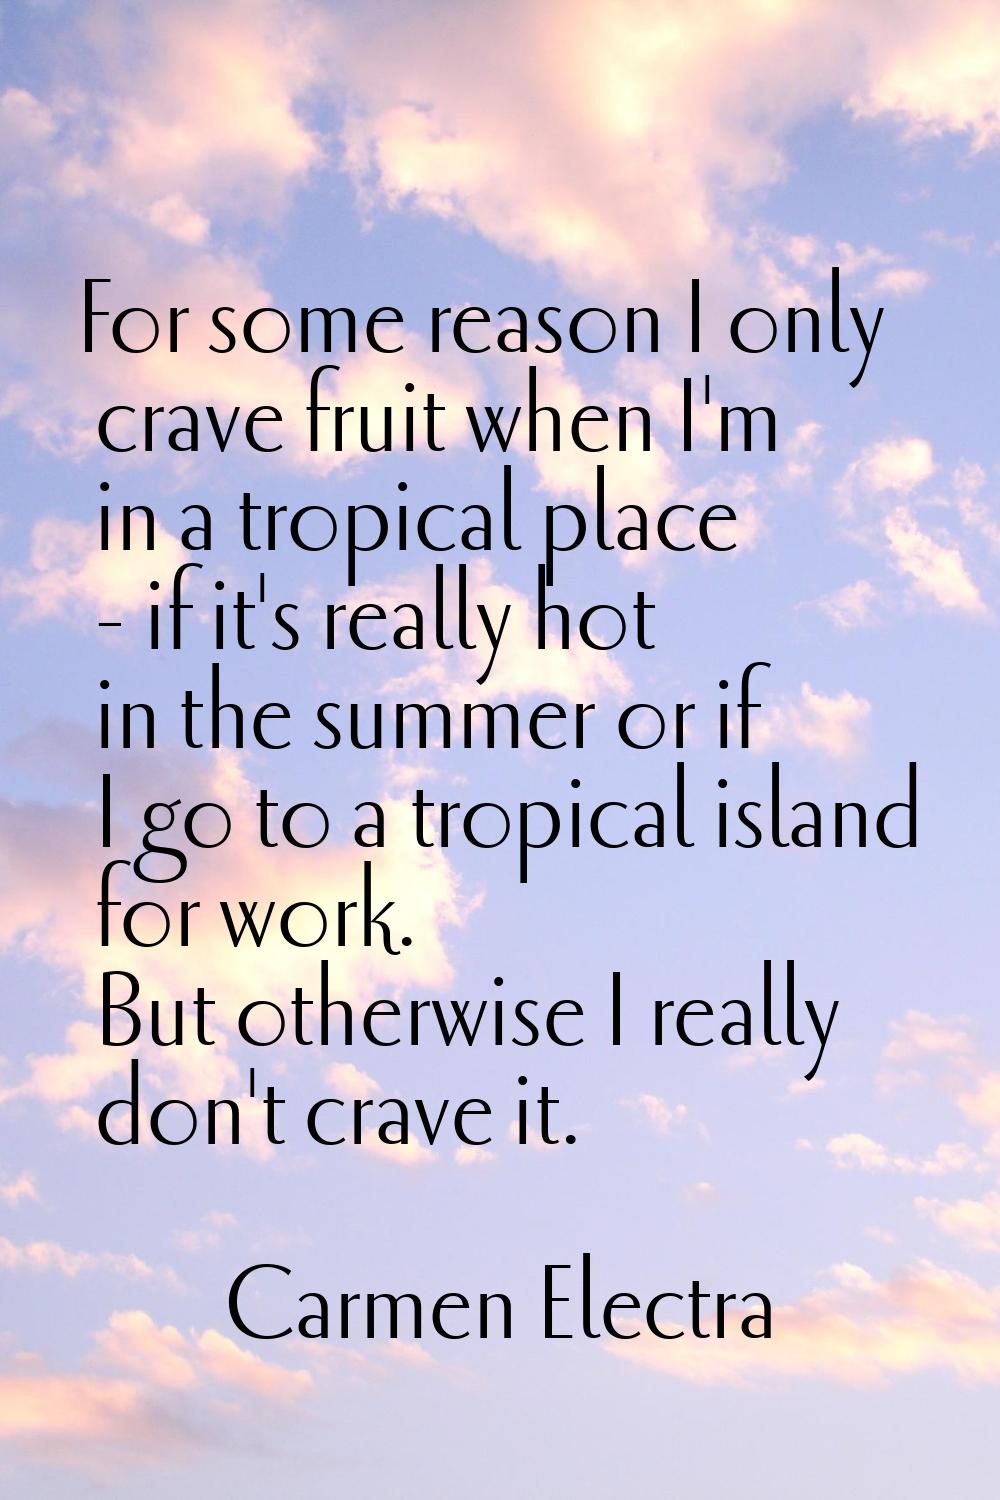 For some reason I only crave fruit when I'm in a tropical place - if it's really hot in the summer 